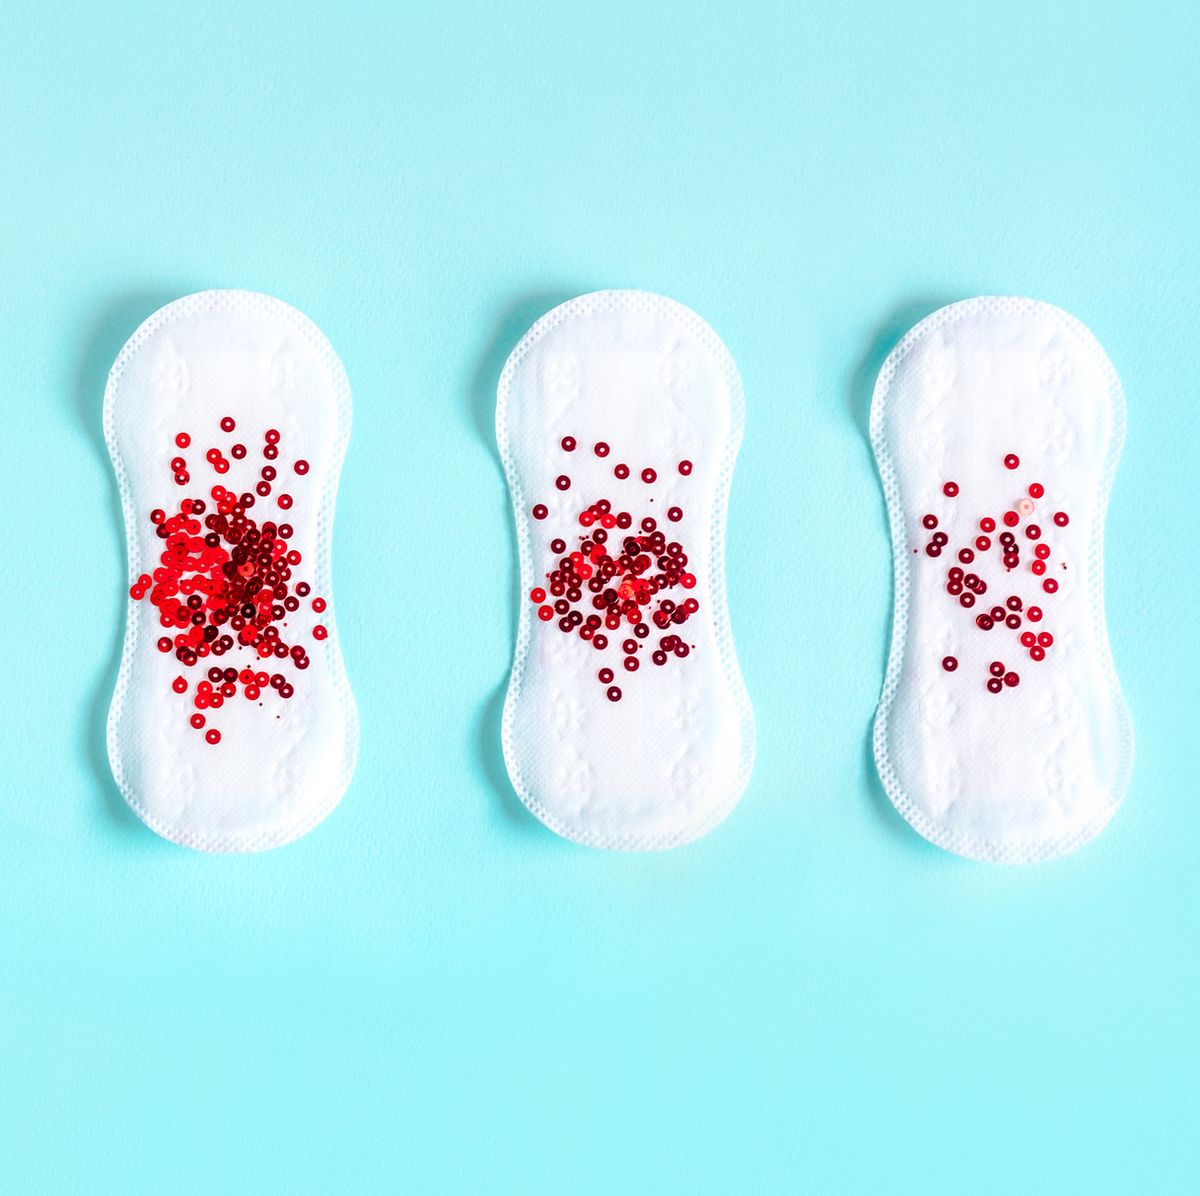 menstrual pads with red glitter on colored background   menopause quiz